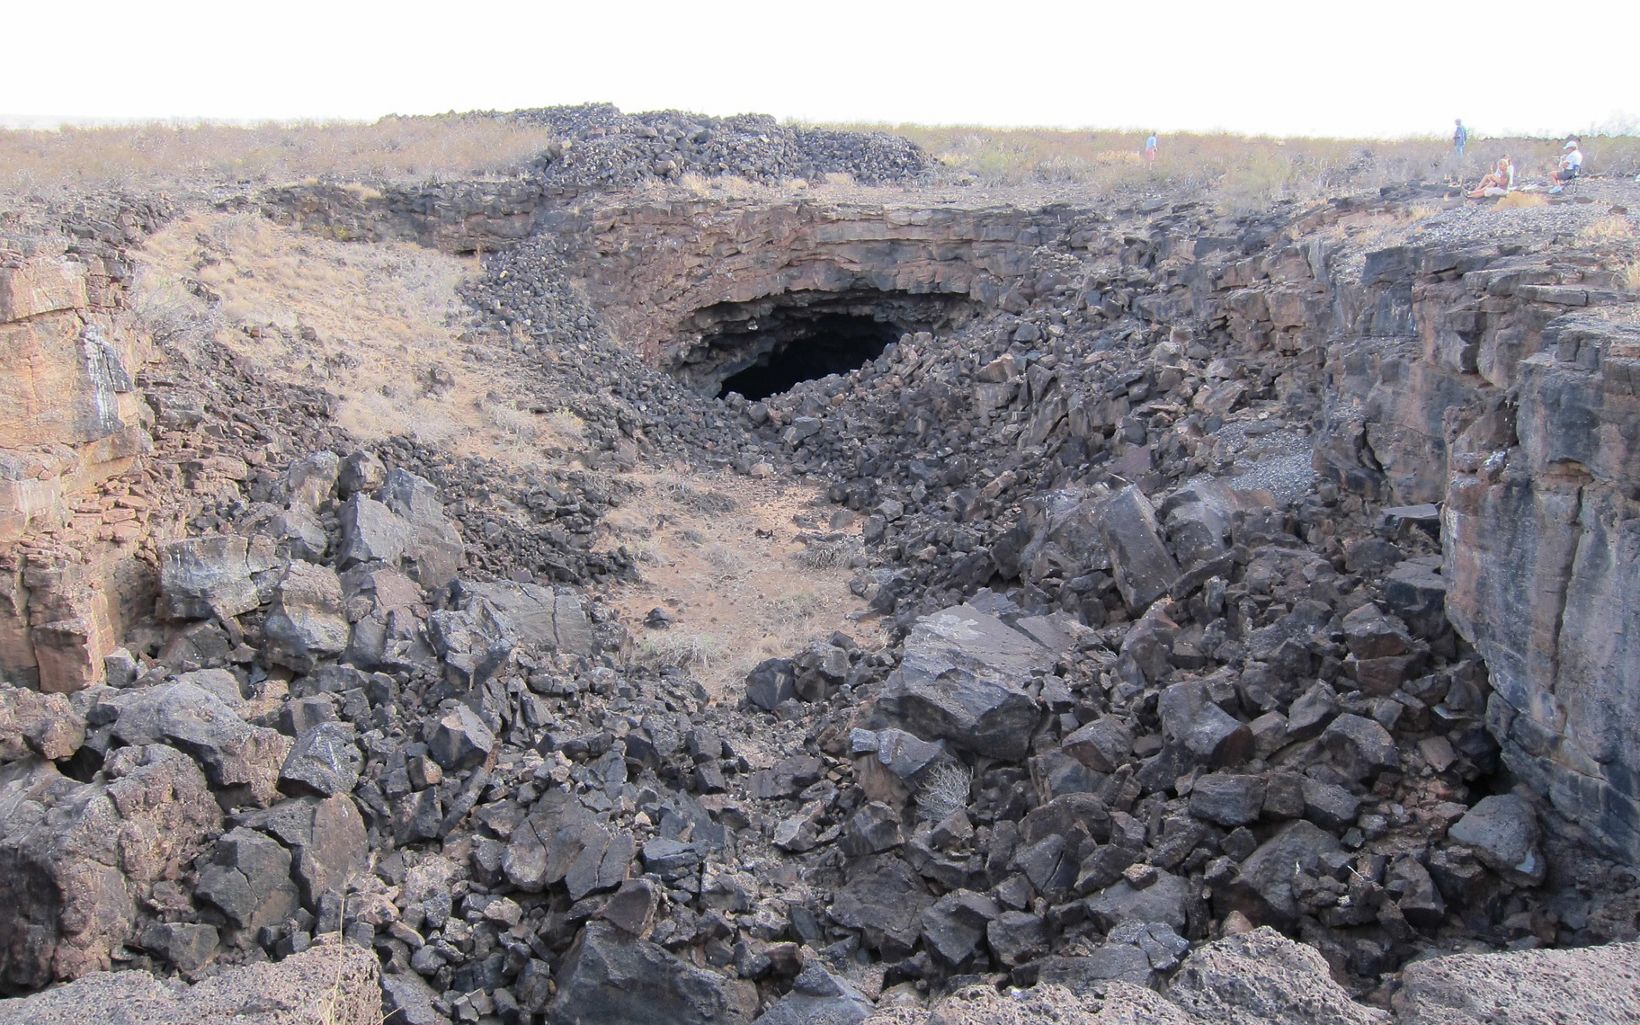 One of several entrances to Jornada Bat Caves, which are actually long lava tubes.